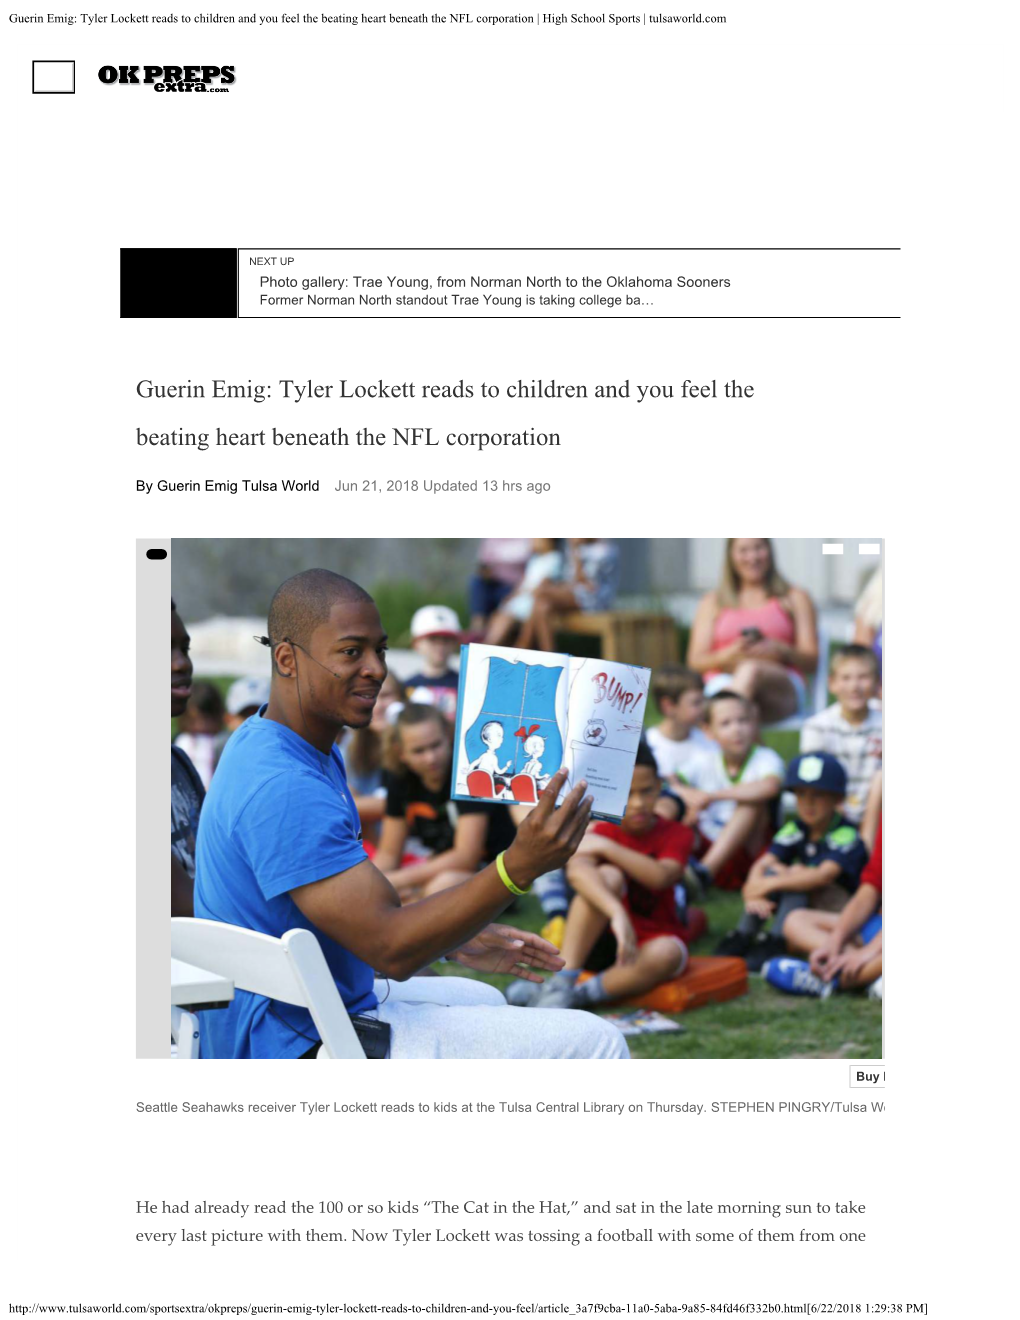 Guerin Emig: Tyler Lockett Reads to Children and You Feel the Beating Heart Beneath the NFL Corporation | High School Sports | Tulsaworld.Com